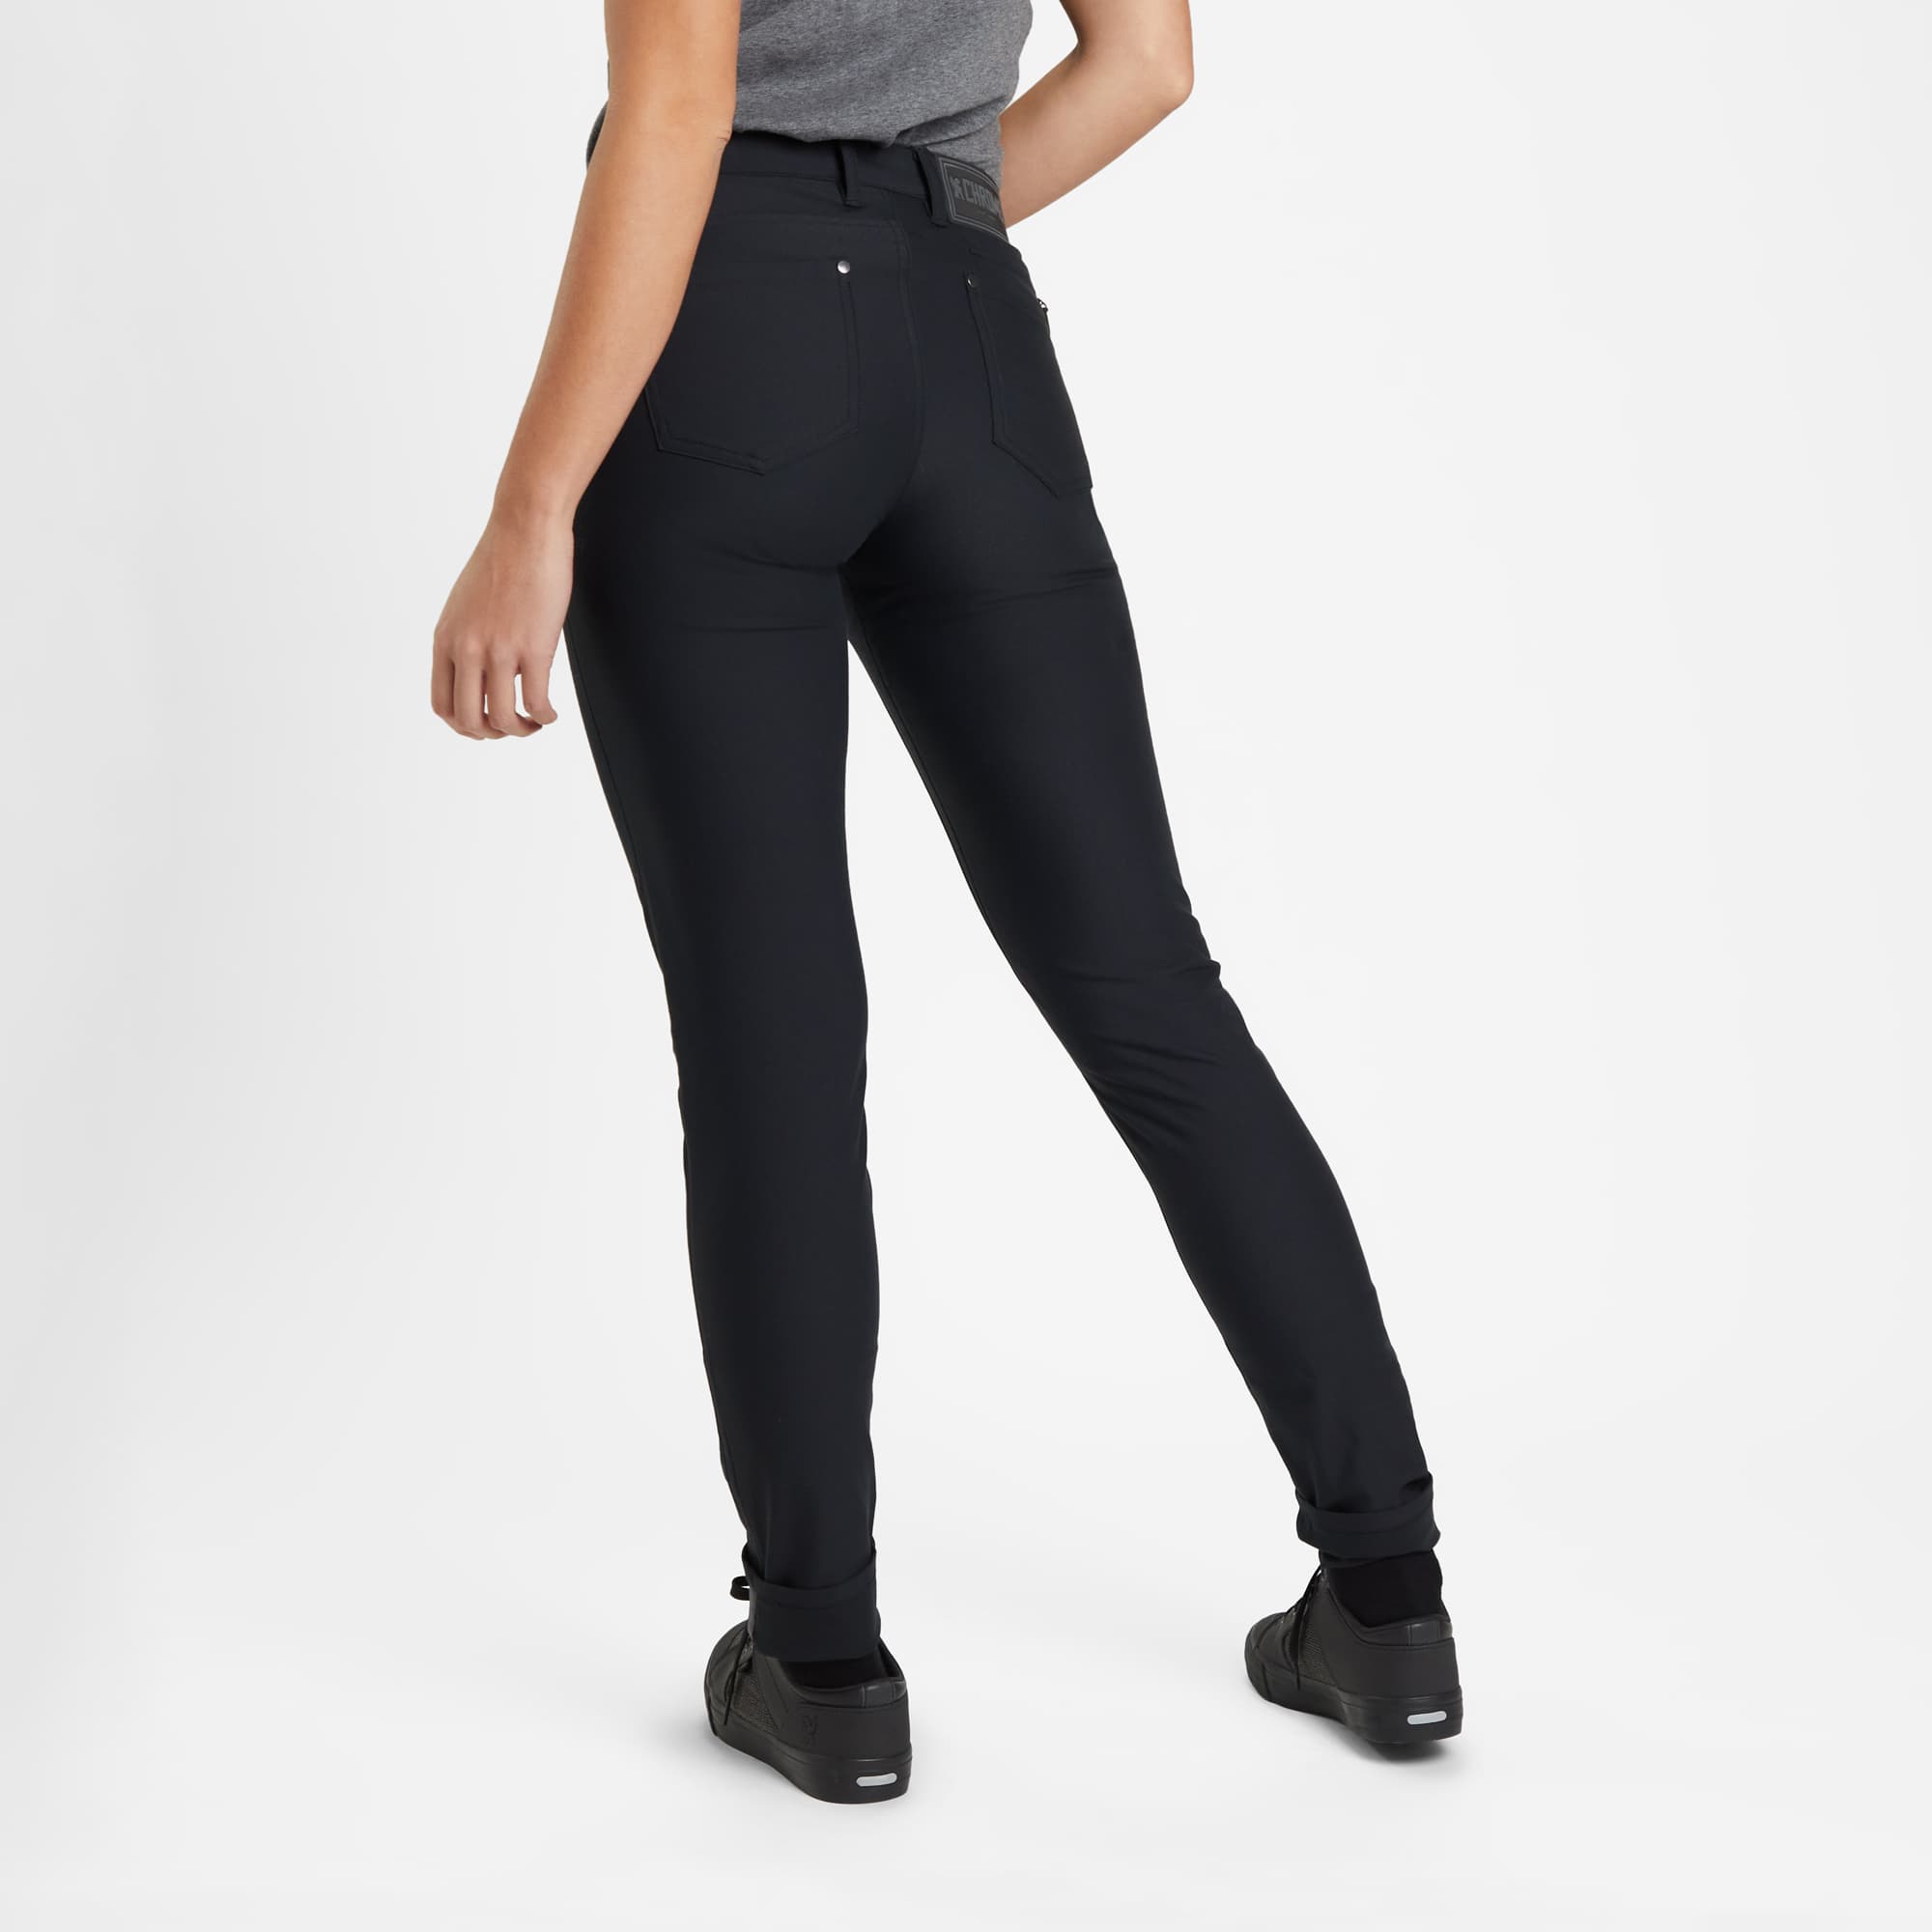 Women's 5 pocket pant in black worn by a woman back view full length